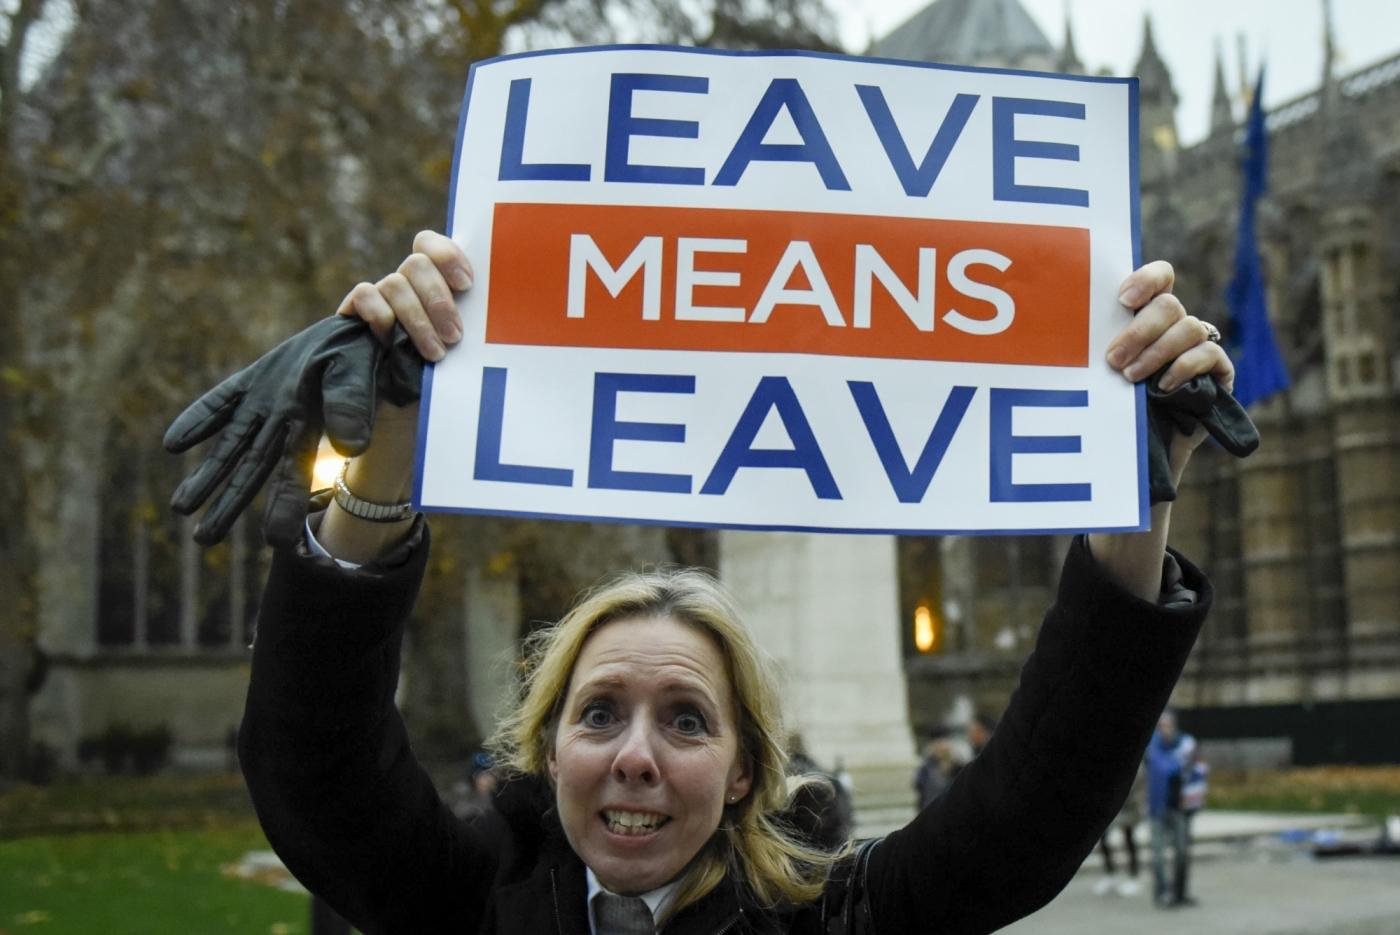 LONDON, Dec. 4, 2018 (Xinhua) -- A pro-Brexit supporter is seen outside the House of Commons in London, Britain, on Dec. 4, 2018. British Prime Minister Theresa May said the five day Brexit debate which started Tuesday evening in the House of Commons will set the course Britain takes for decades to come. Next Tuesday MPs will vote on whether to support or reject a deal agreed between May's government and the European Union on Britain's future relationship with Brussels. (Xinhua/Stephen Chung/IANS) by . 